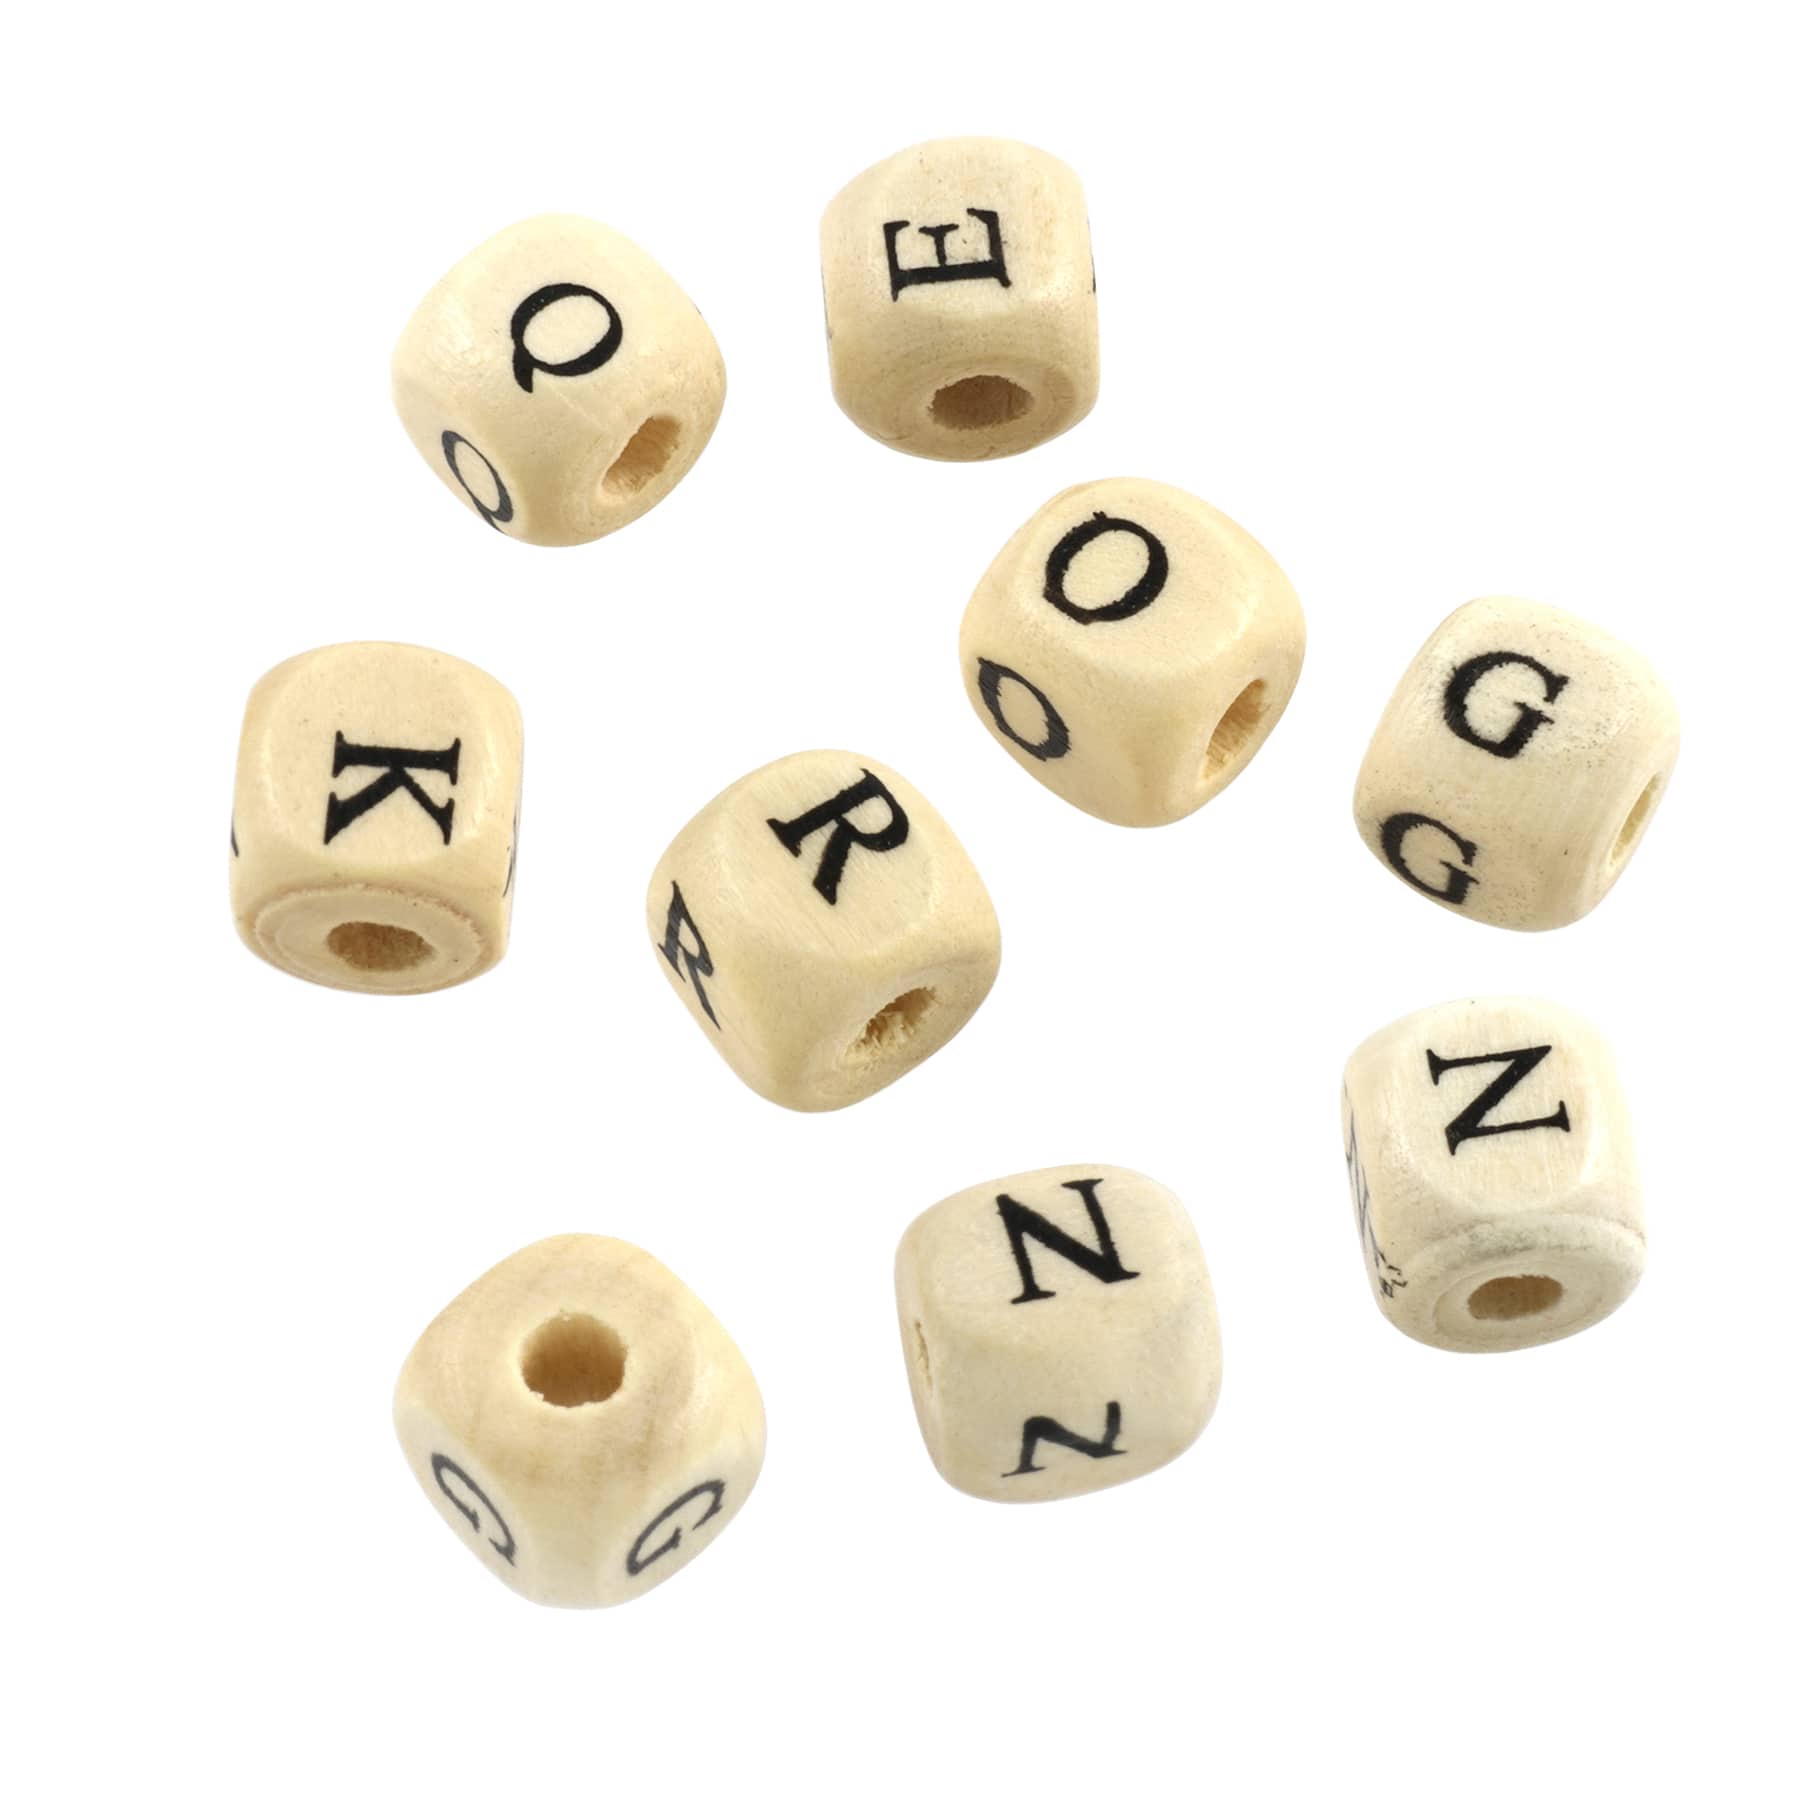 Wooden beads with alphabet letters